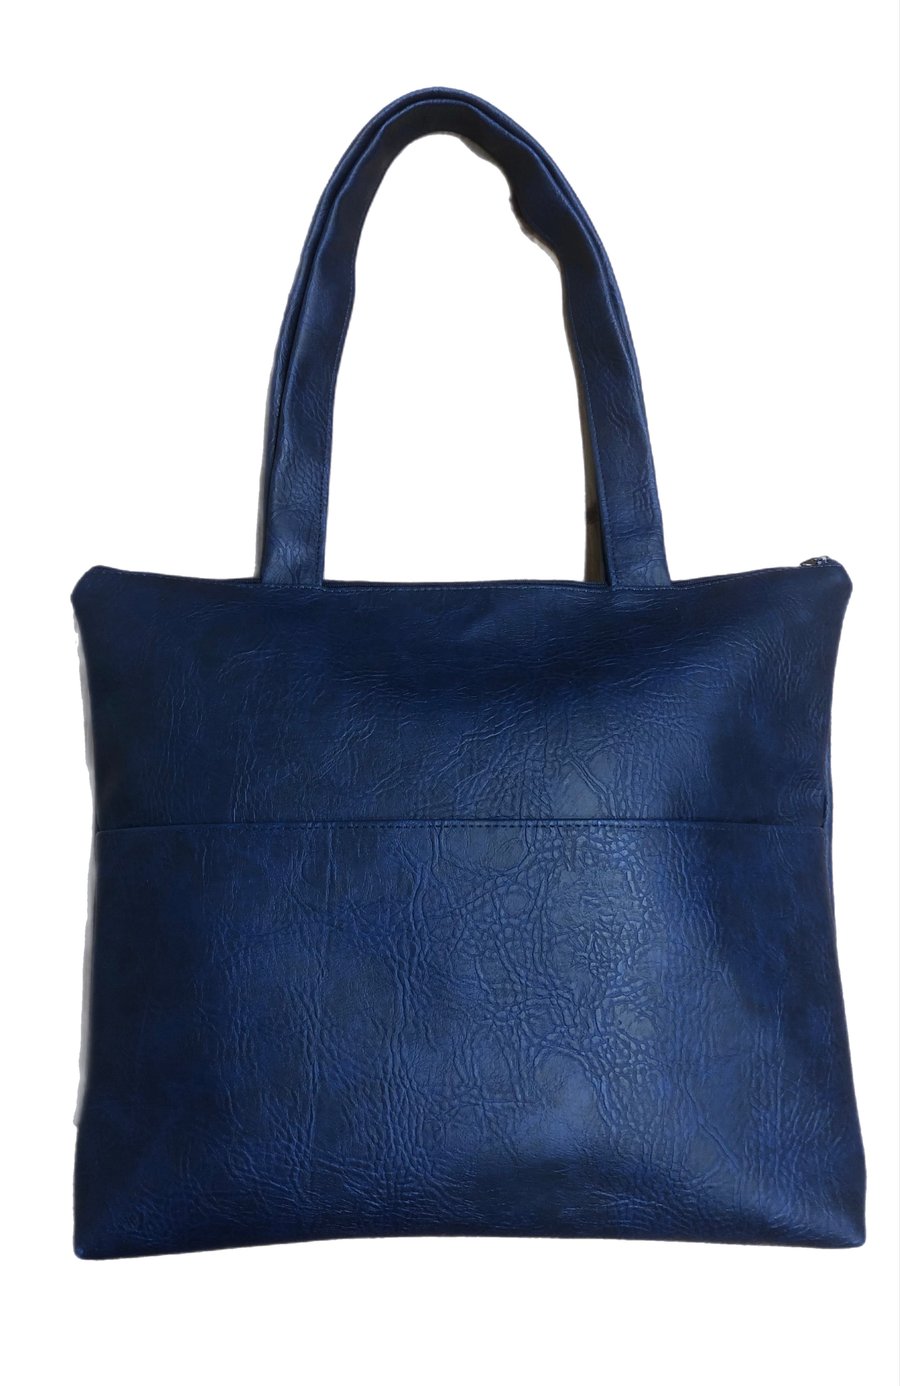 Navy Blue Leather Zippered Tote Handbag with External Pocket